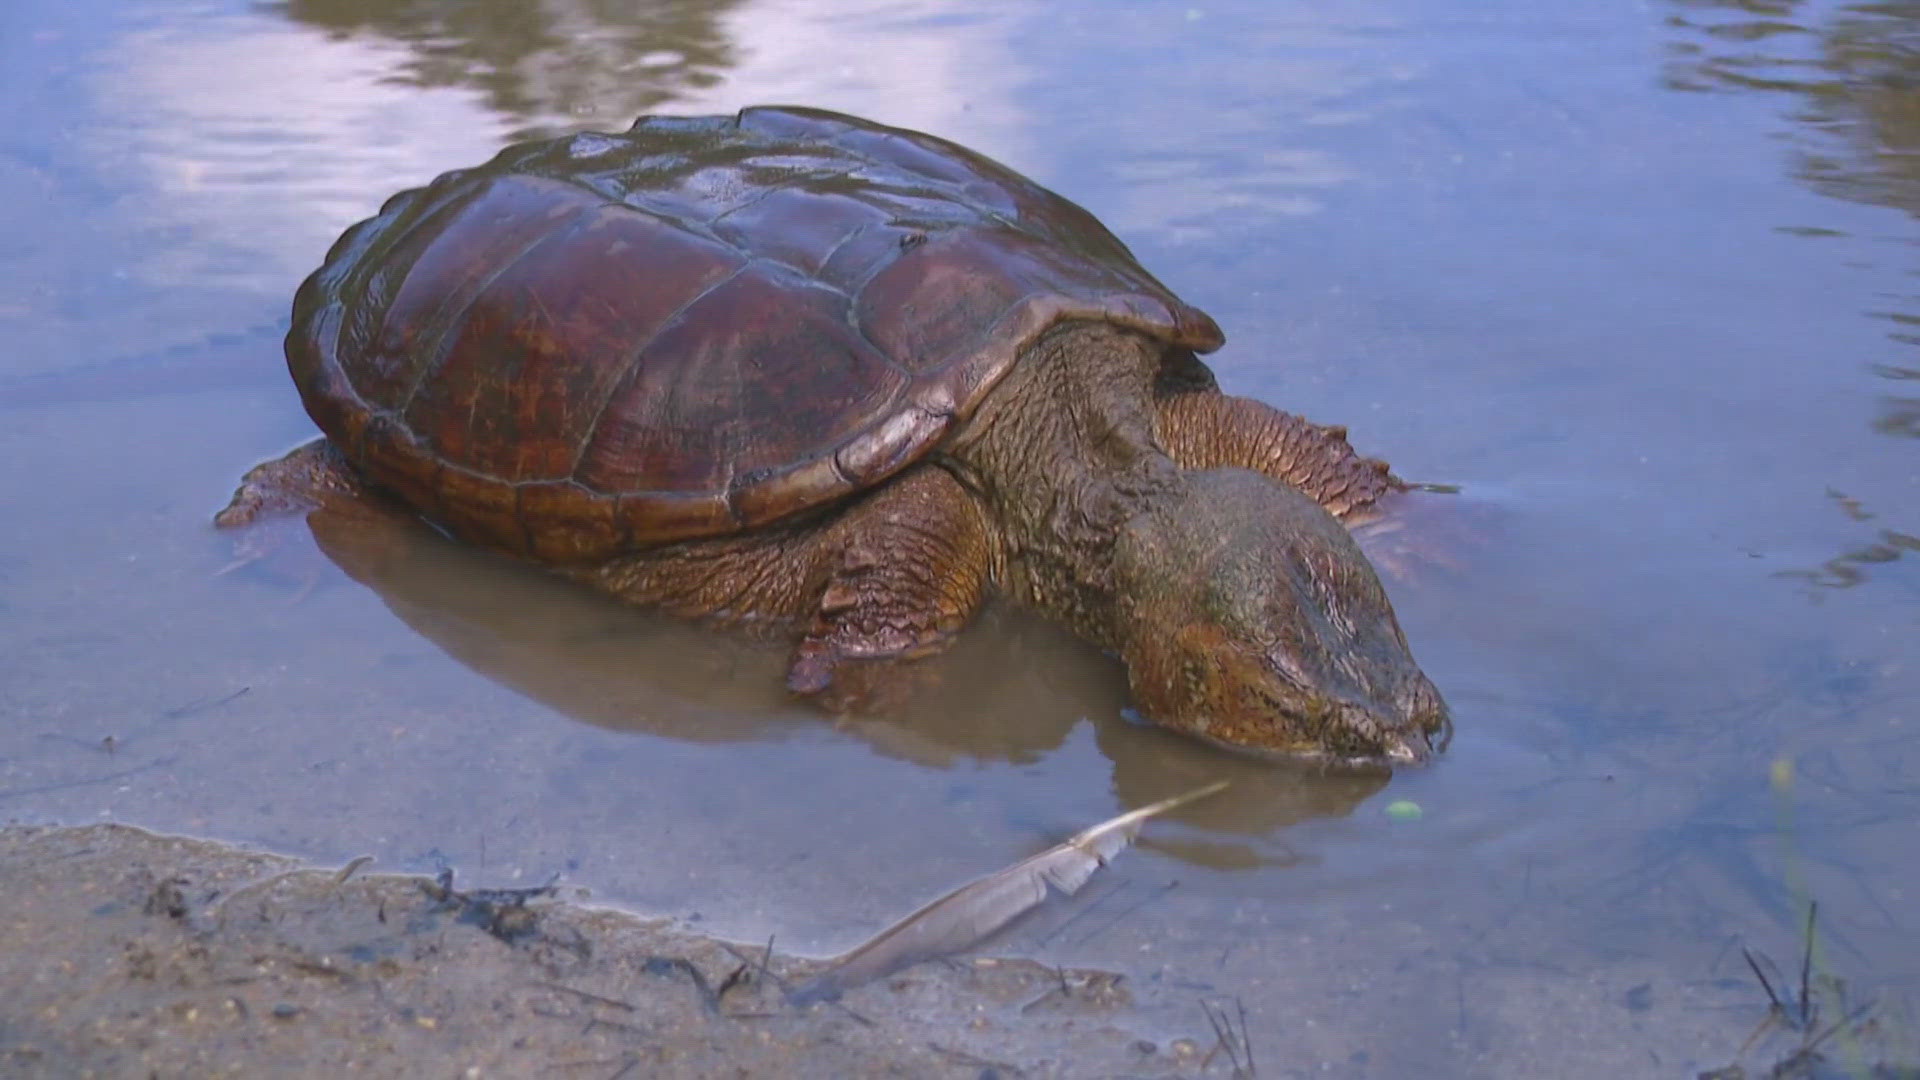 The Maine Department of Inland Fisheries & Wildlife said abuse of turtles is uncommon in the state. The agency is talking with people about what they said they saw.